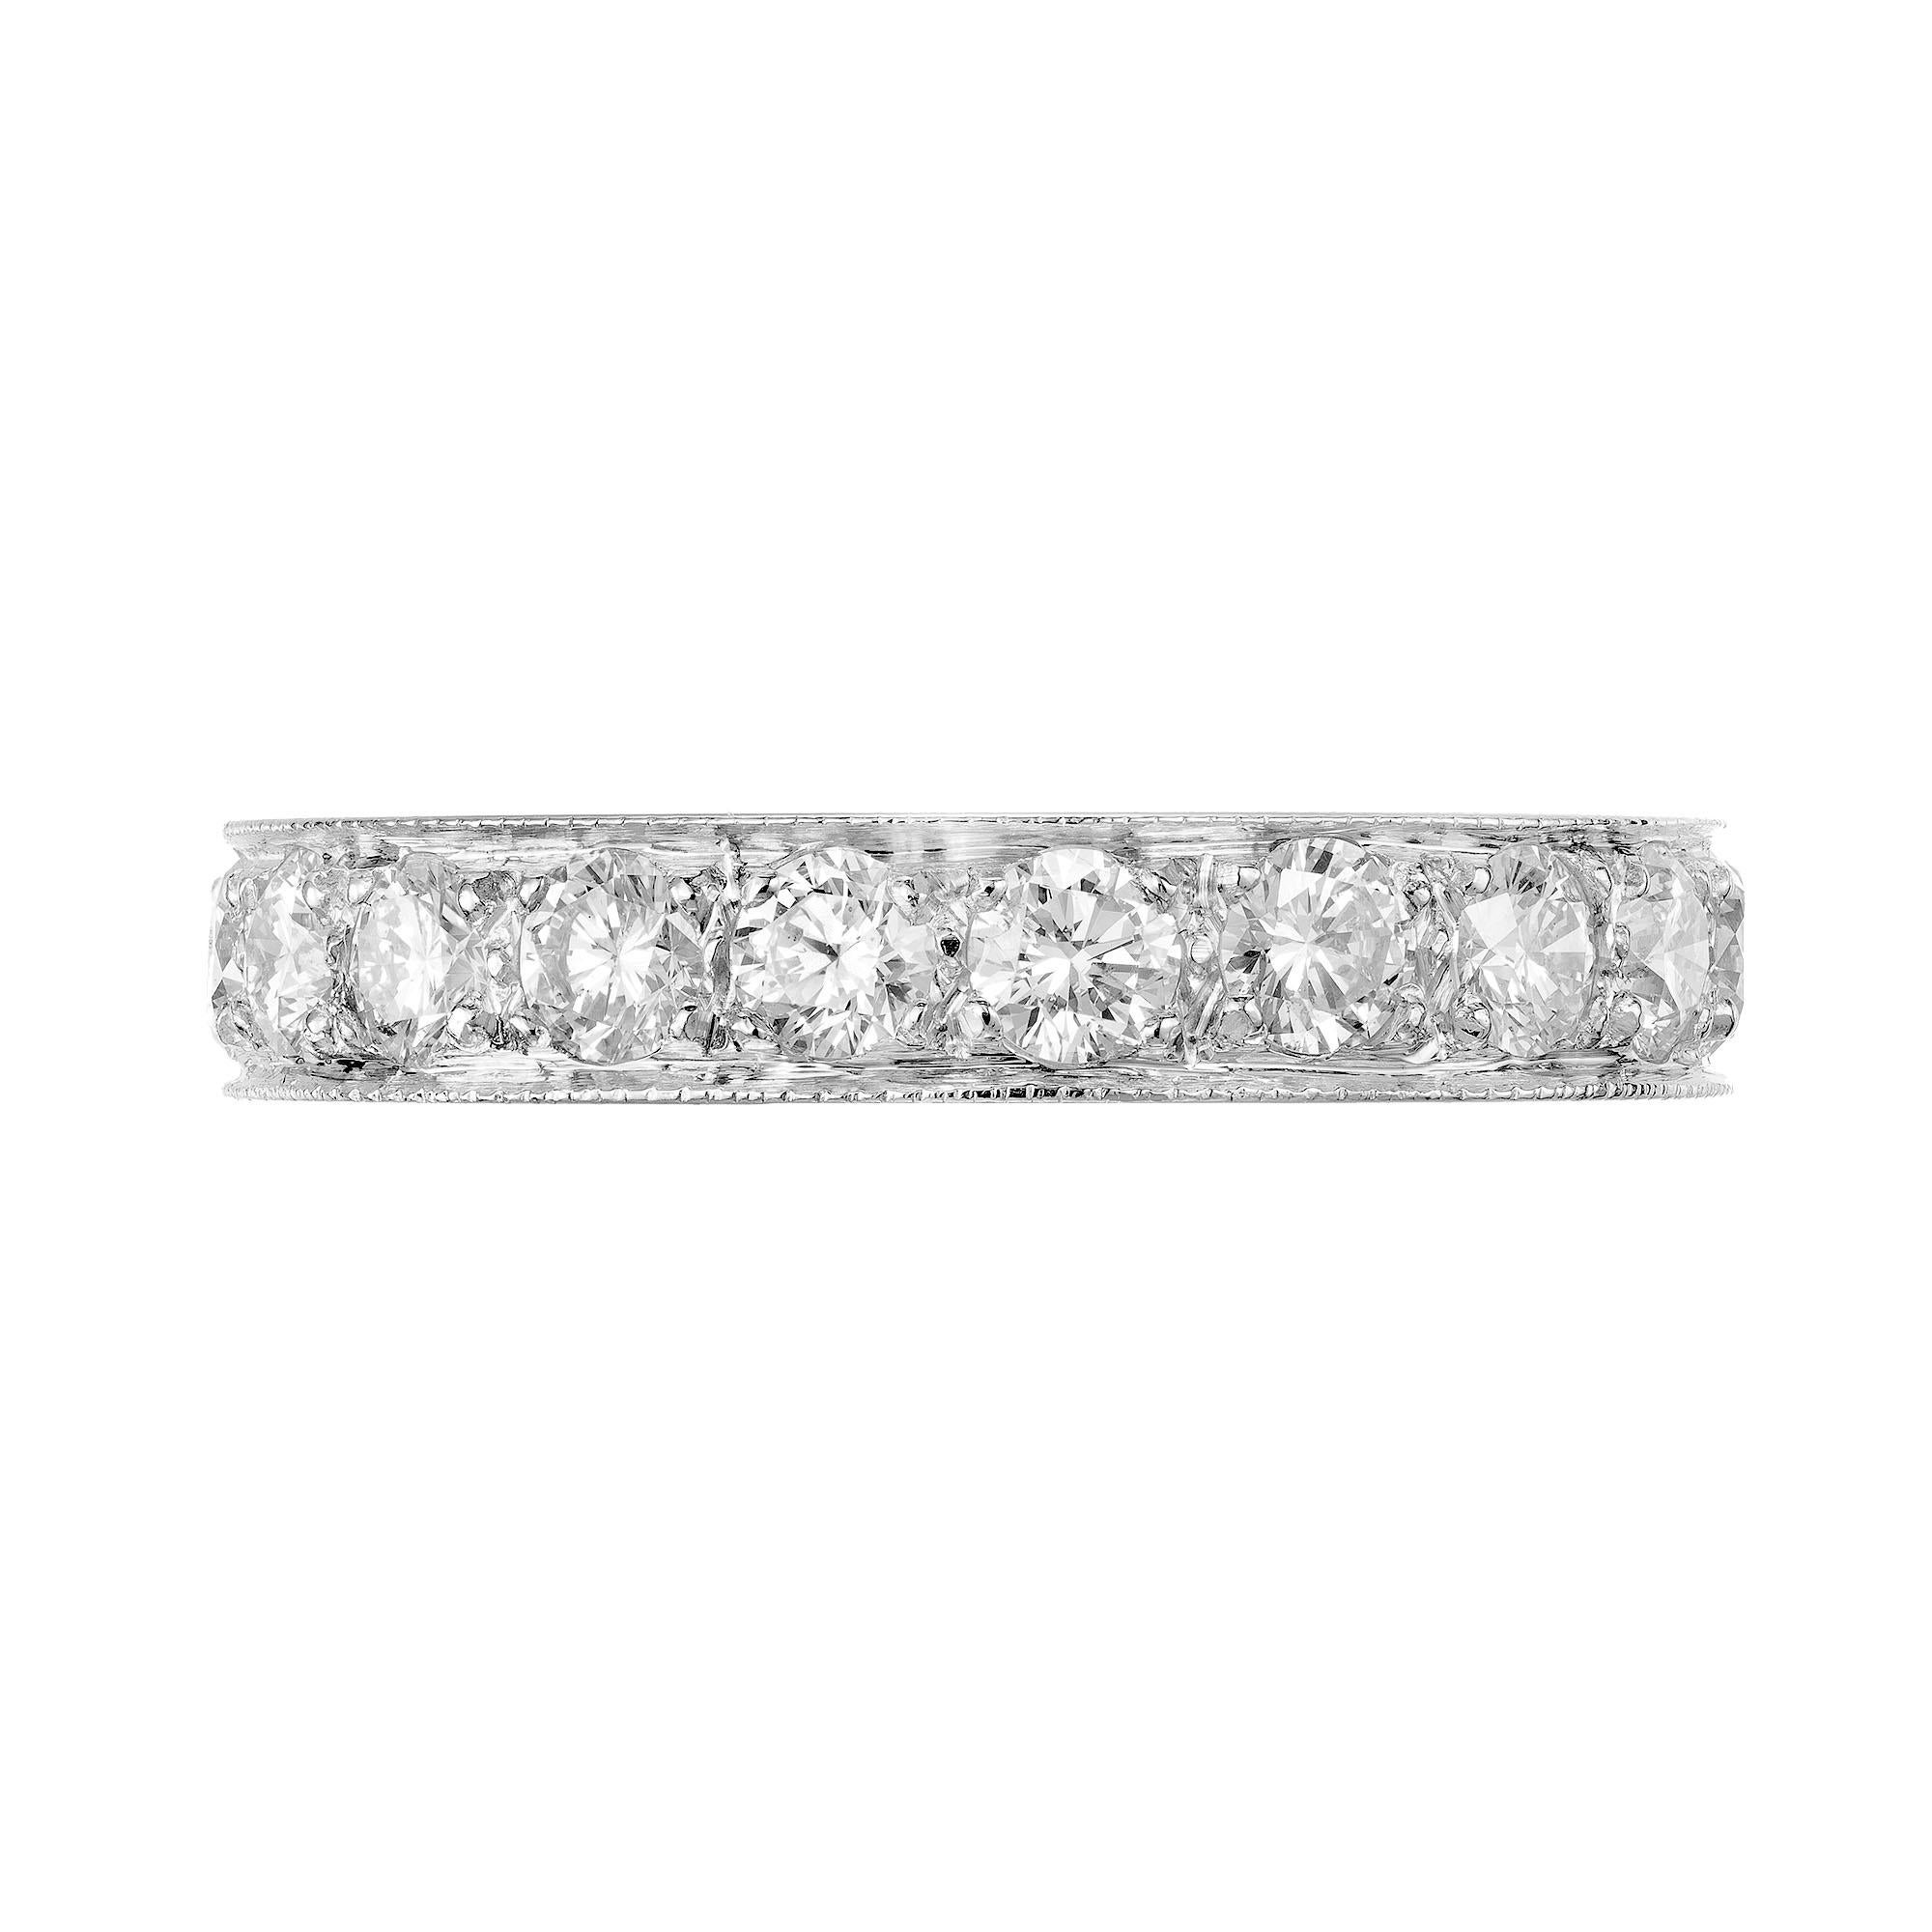 Classic Platinum round diamond, hand bead set wedding band ring. Made in the Peter Suchy Workshop.

19 round brilliant cut diamonds, approx. total weight 2.25cts, F, VVS-VS
Size 6 and not sizable
Platinum
Tested: Platinum
Stamped: Plat
7.8